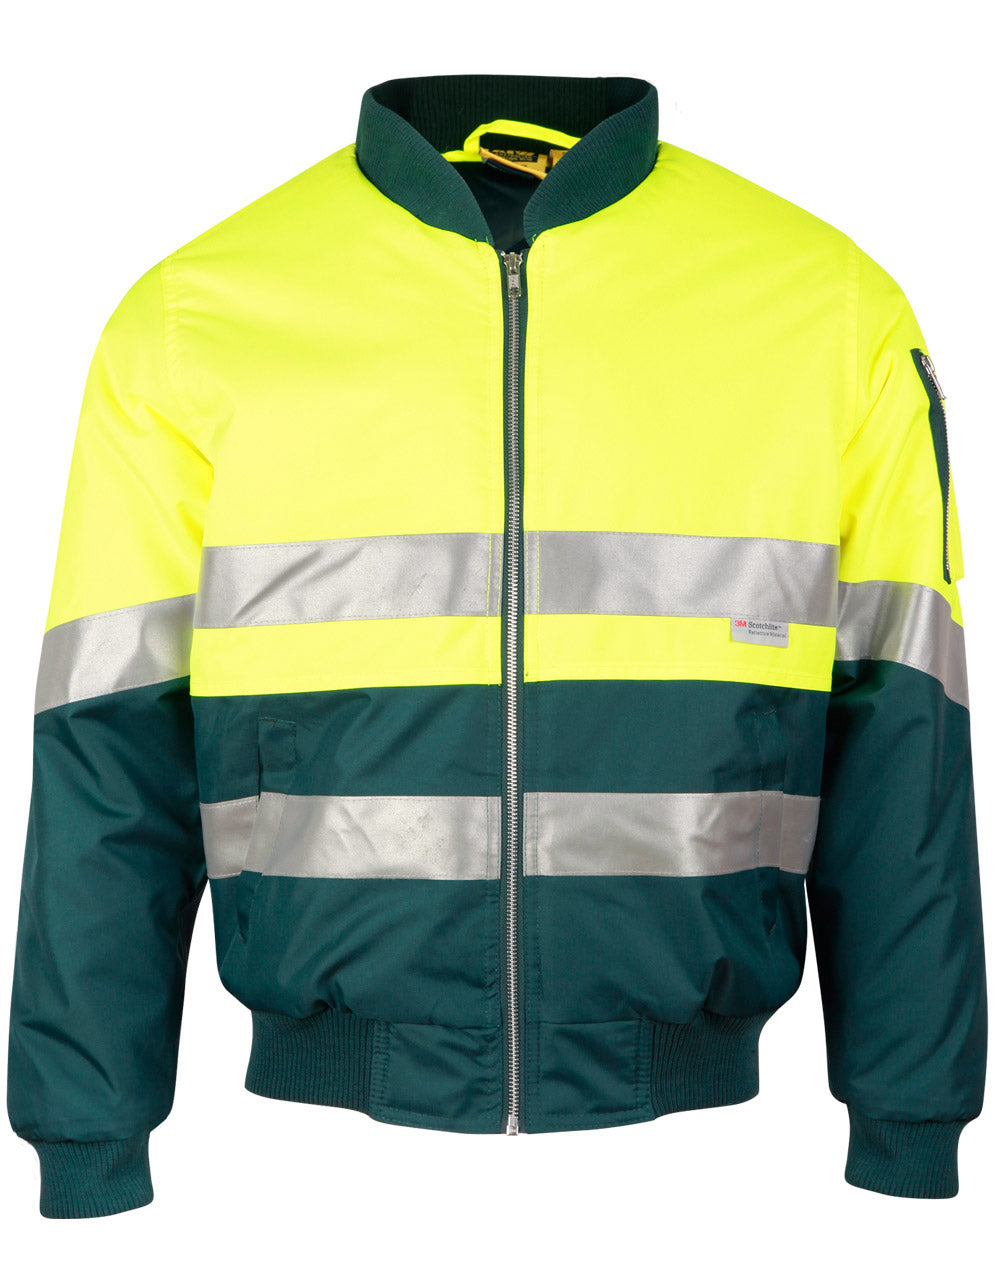 [SW16A] Hi-Vis Two Tone Flying Jacket With 3M Tapes